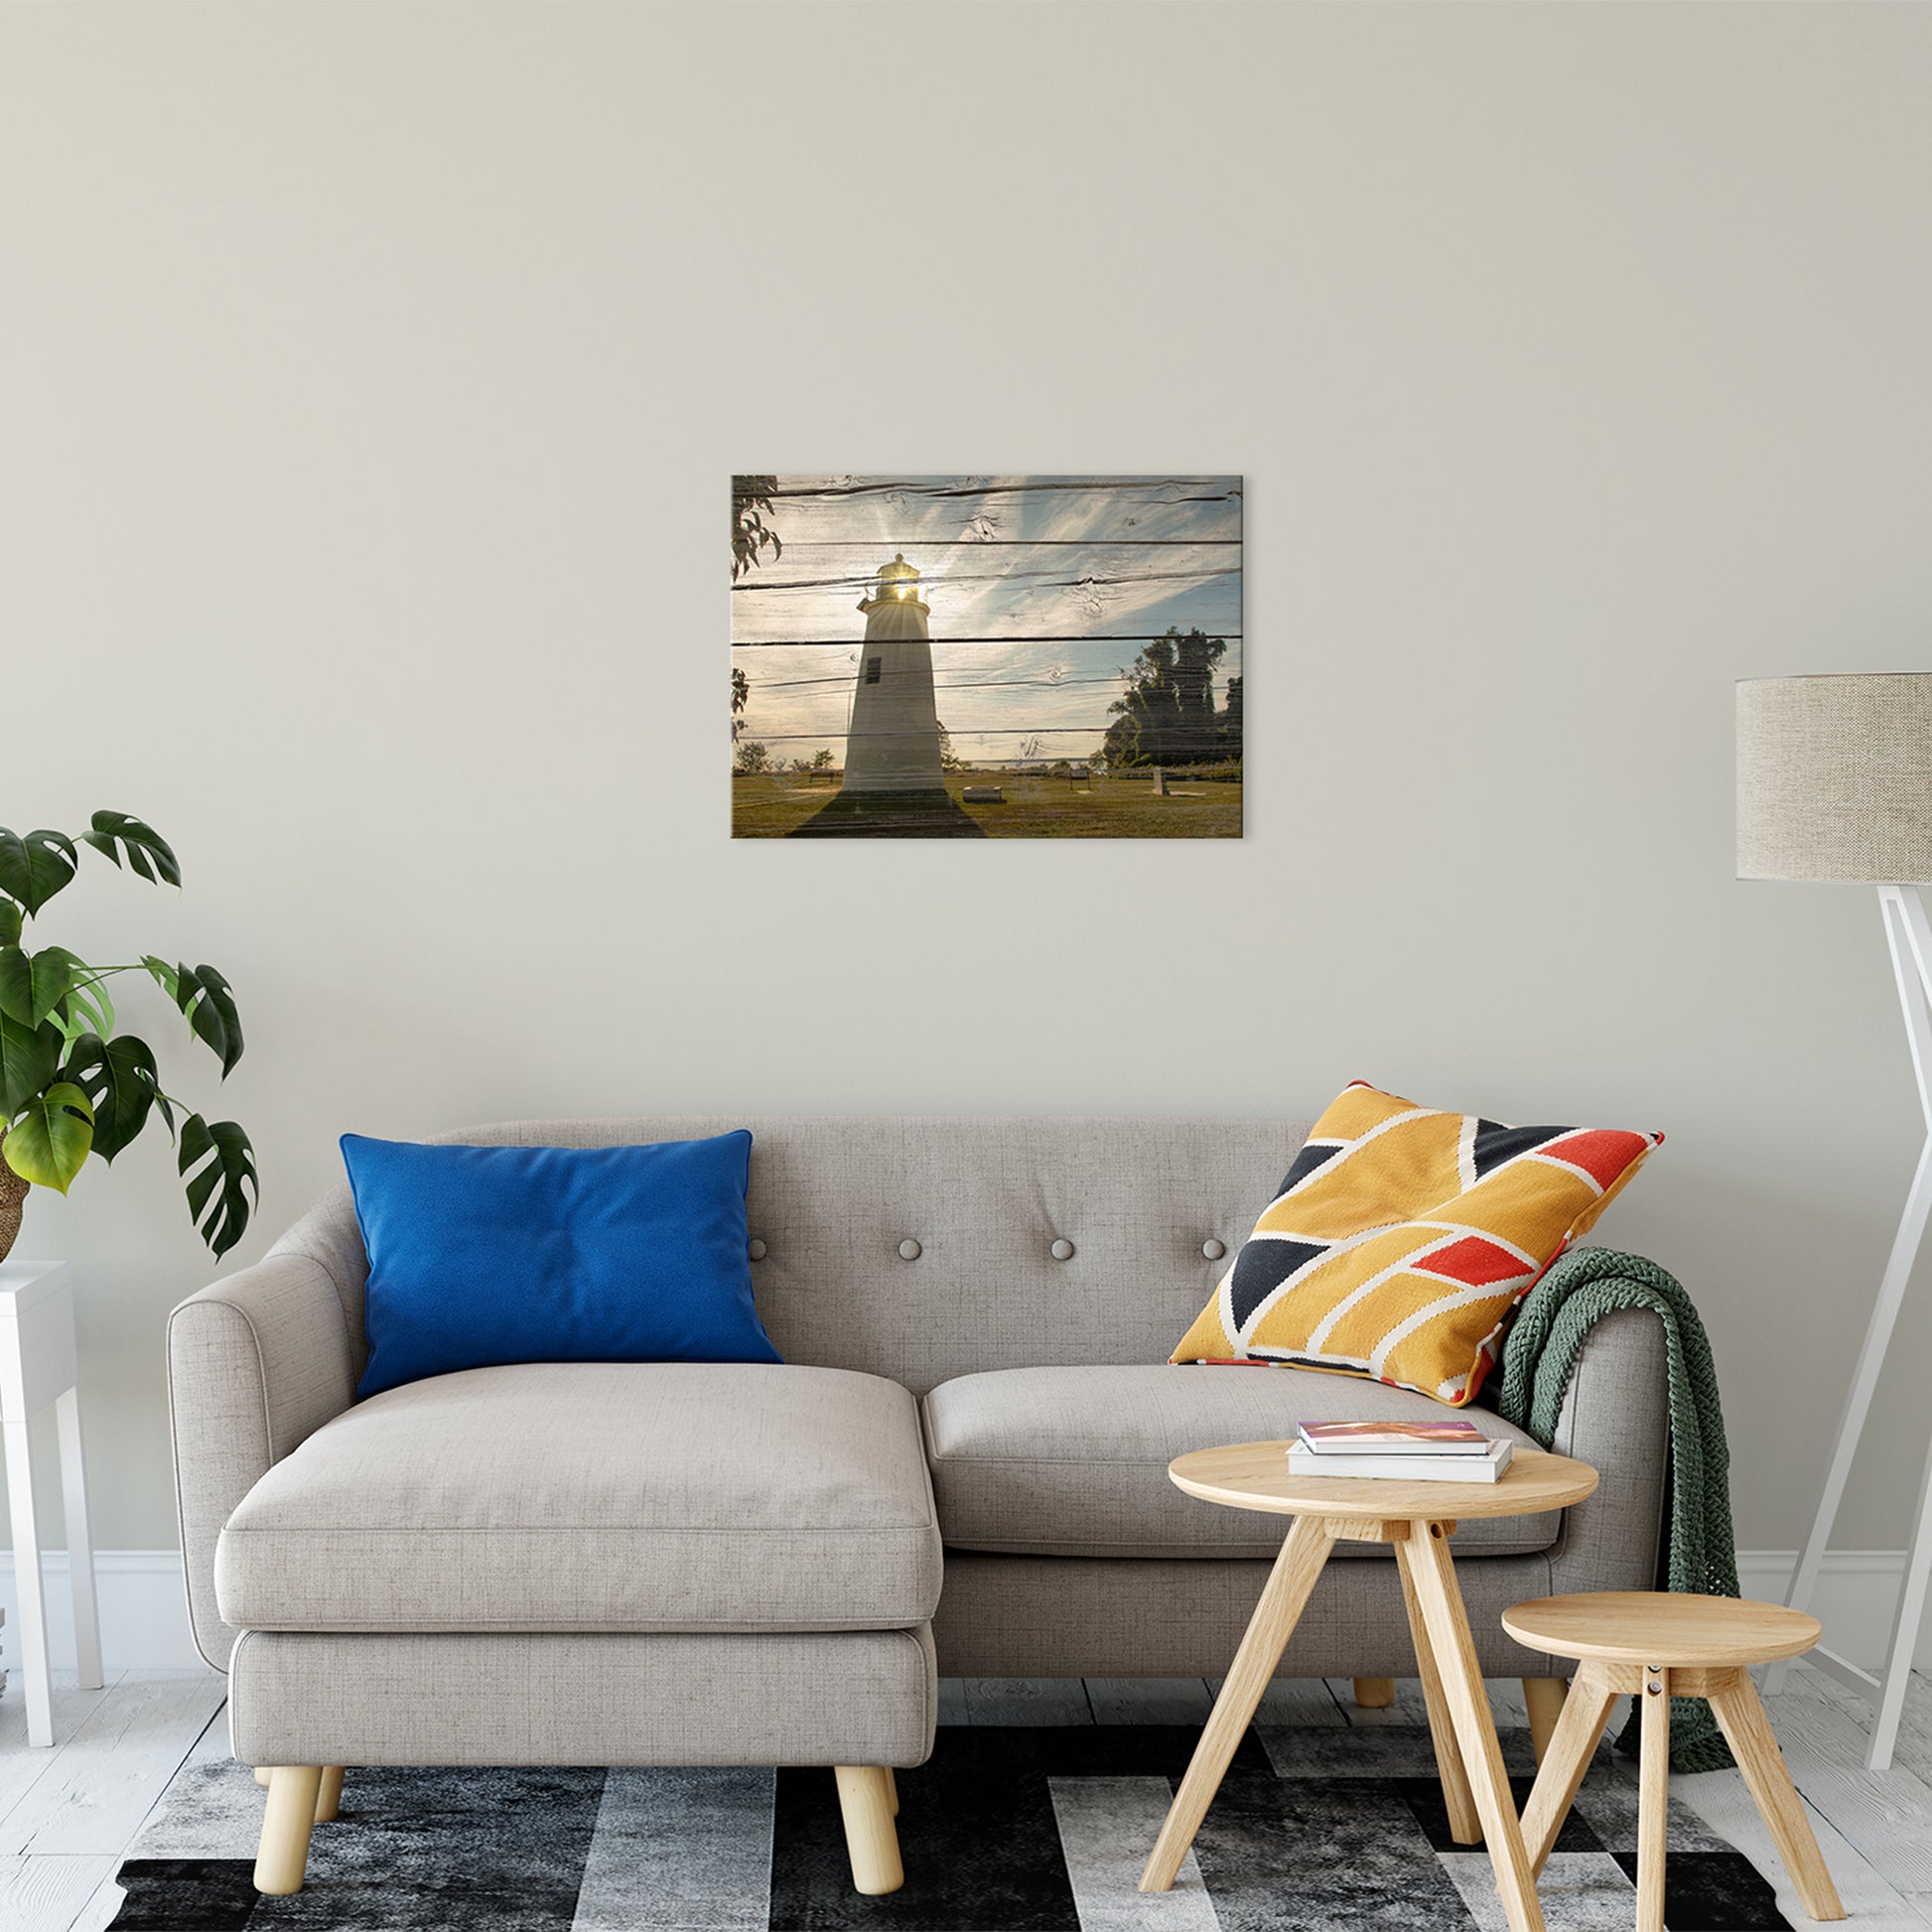 Faux Rustic Reclaimed Wood Turkey Point Lighthouse Fine Art Canvas Wall Art Prints 20" x 30" - PIPAFINEART